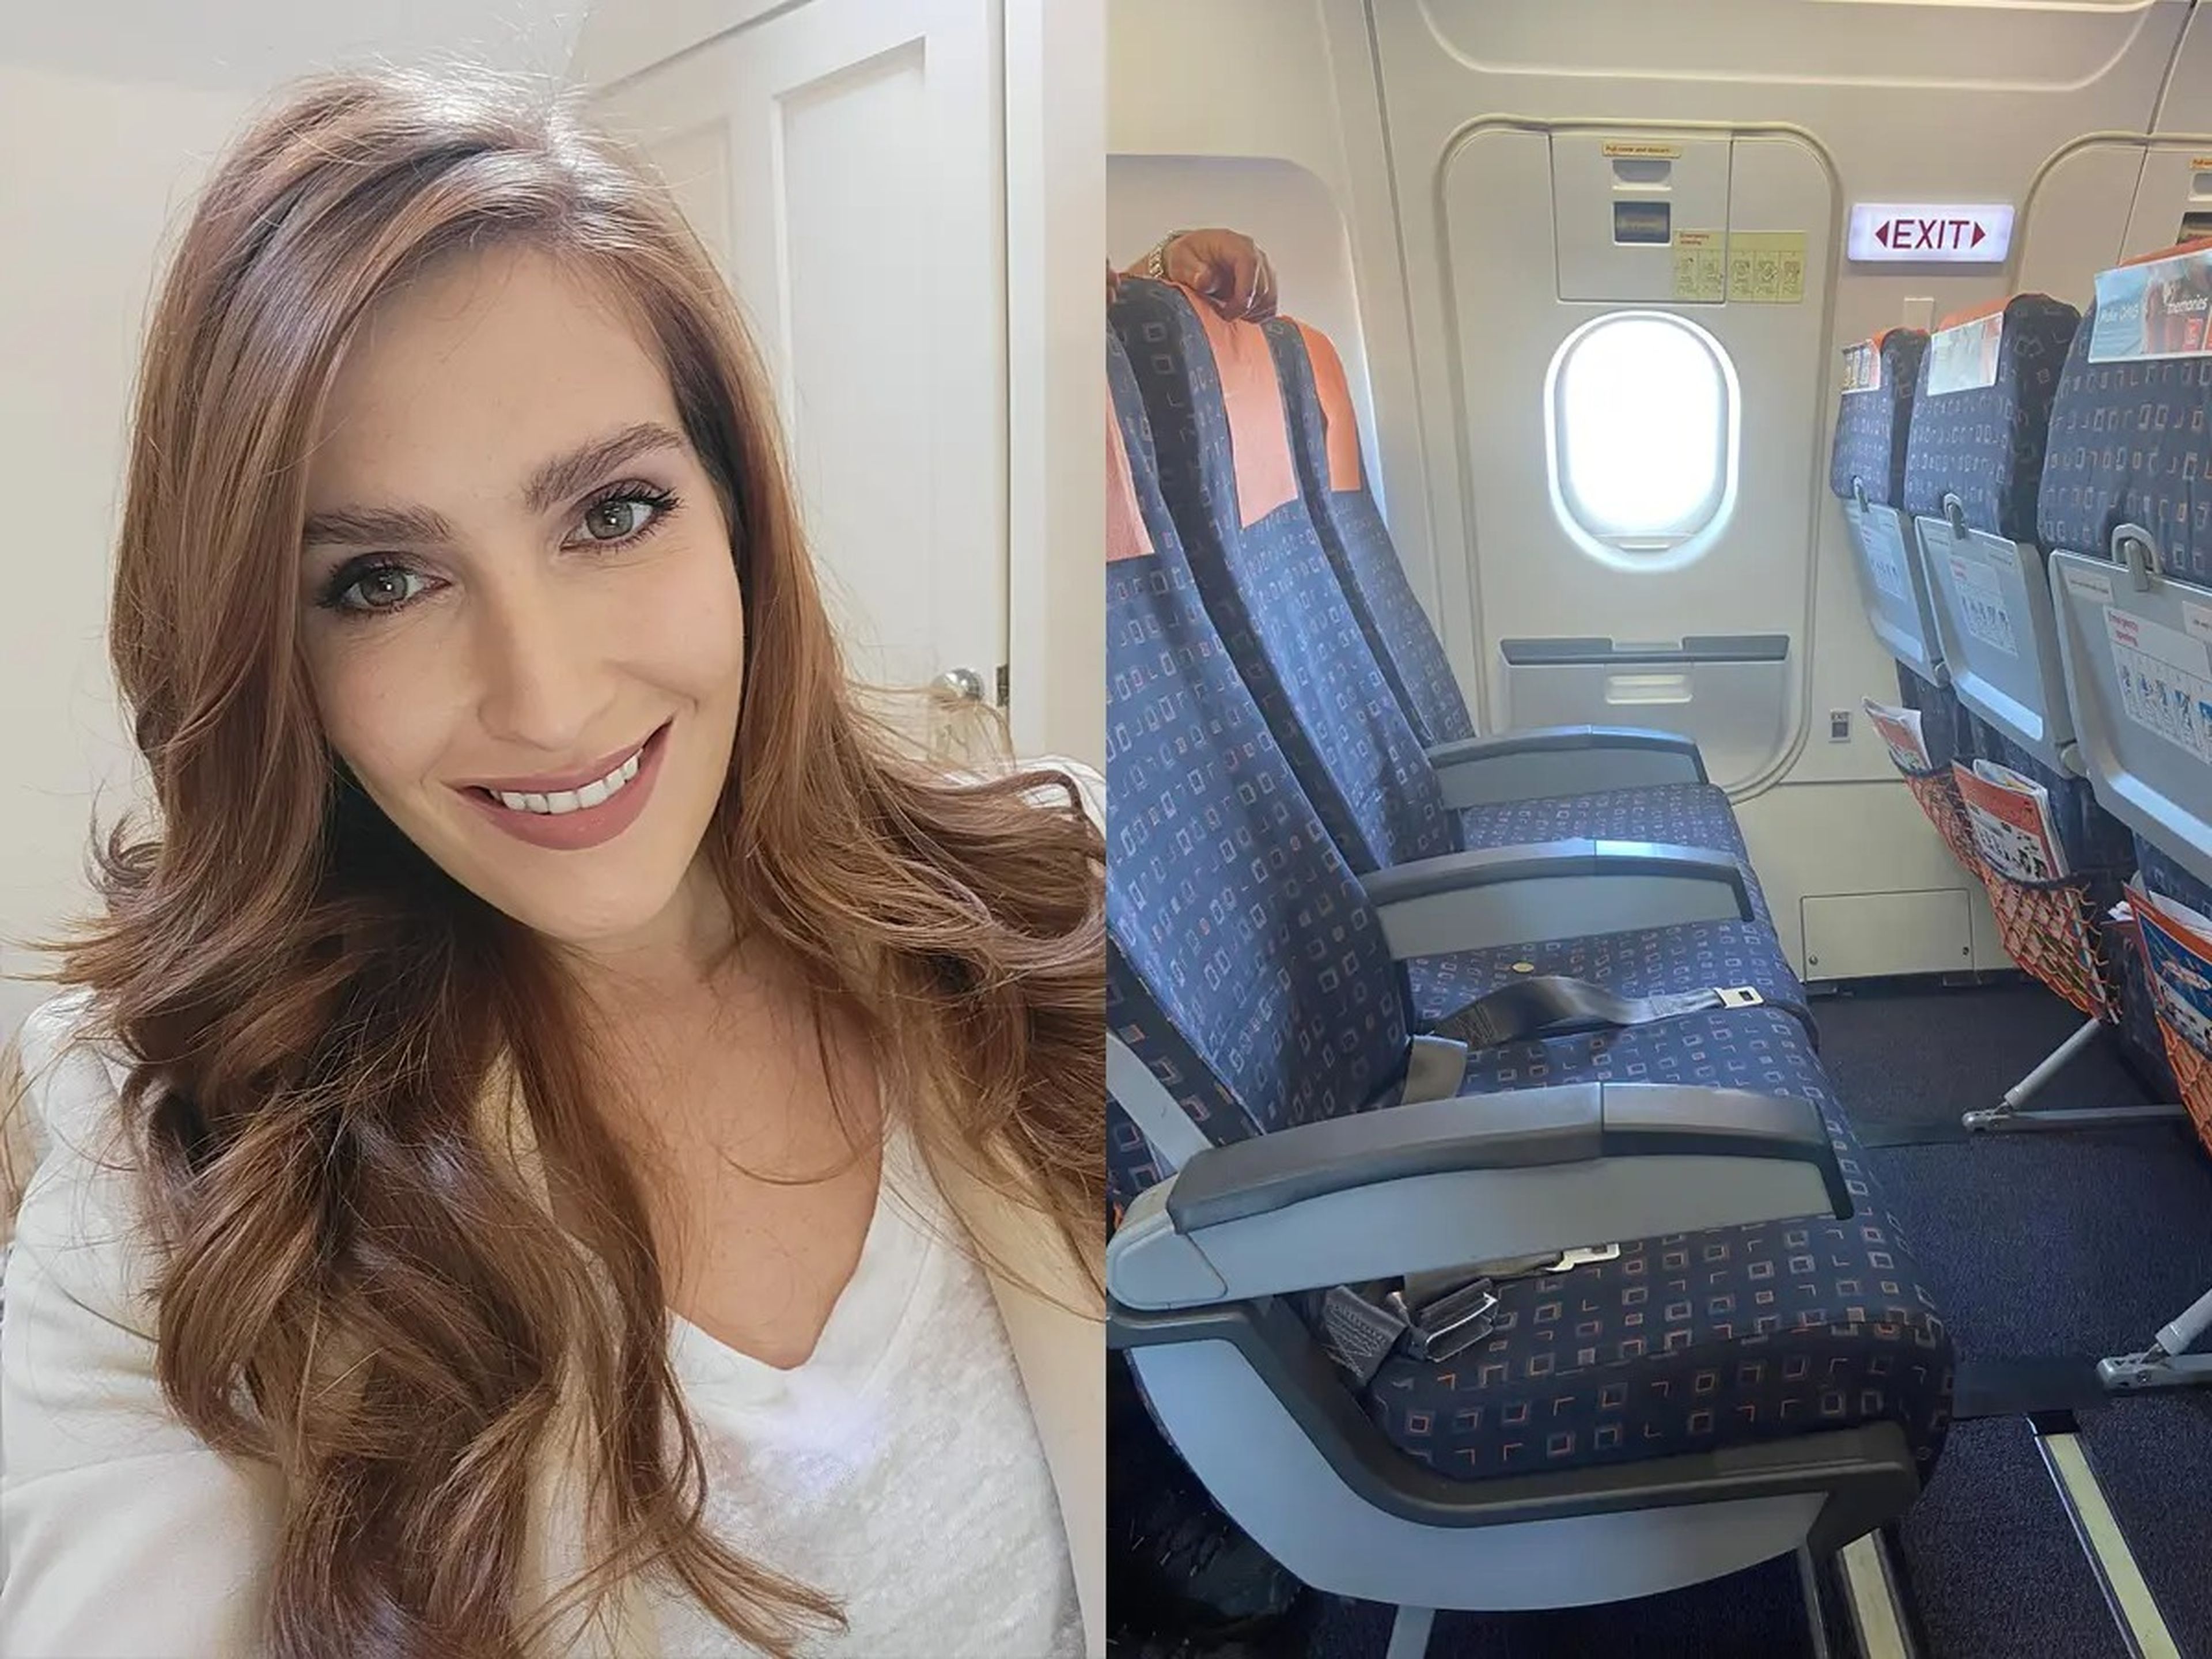 The author, Beth Windsor, smiling in a selfie next to a photo of a three-seat row of airplane seats